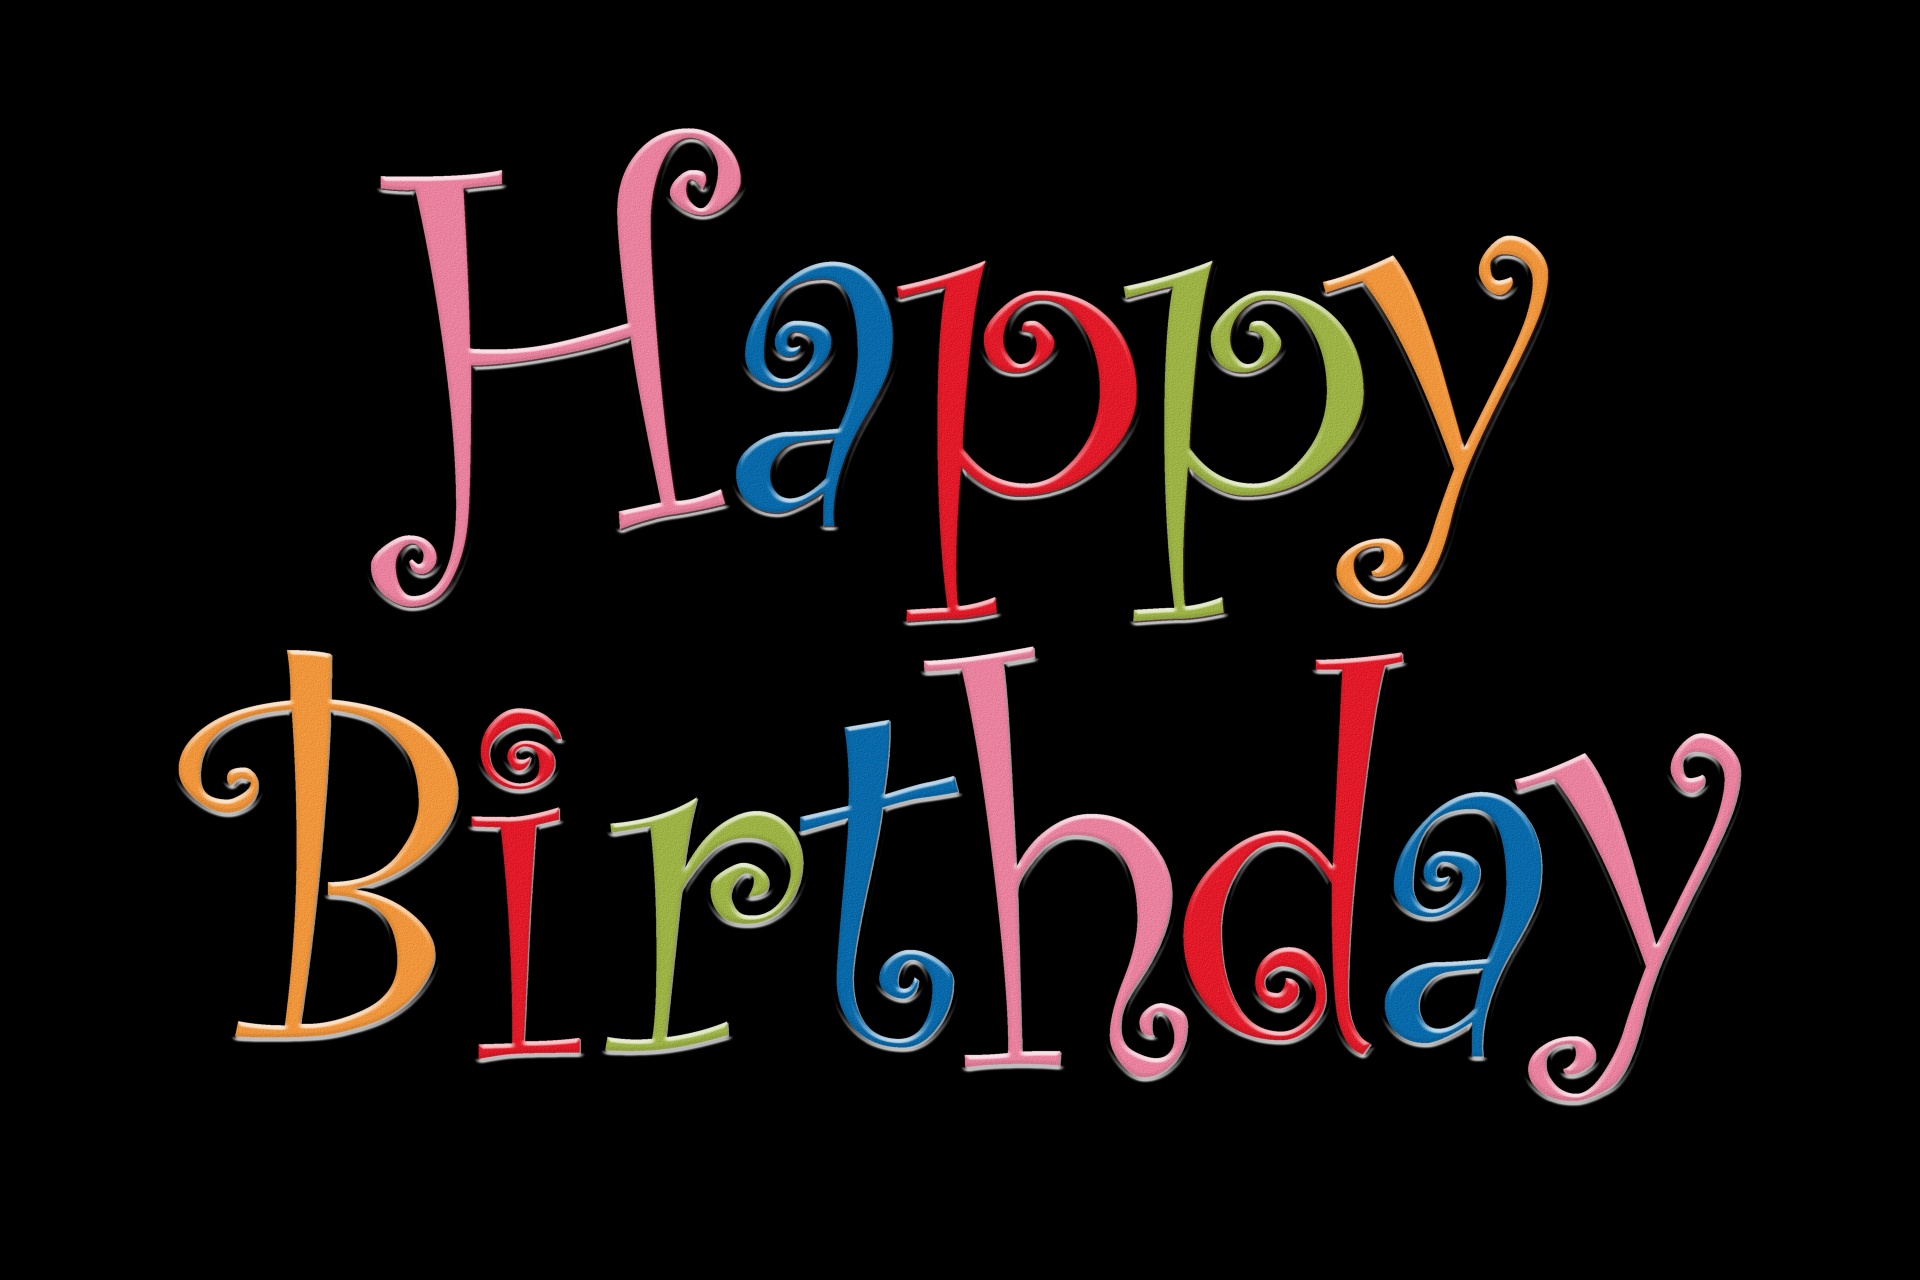 happy-birthday-greetings-background-1580811851DtR - KnowUrLife